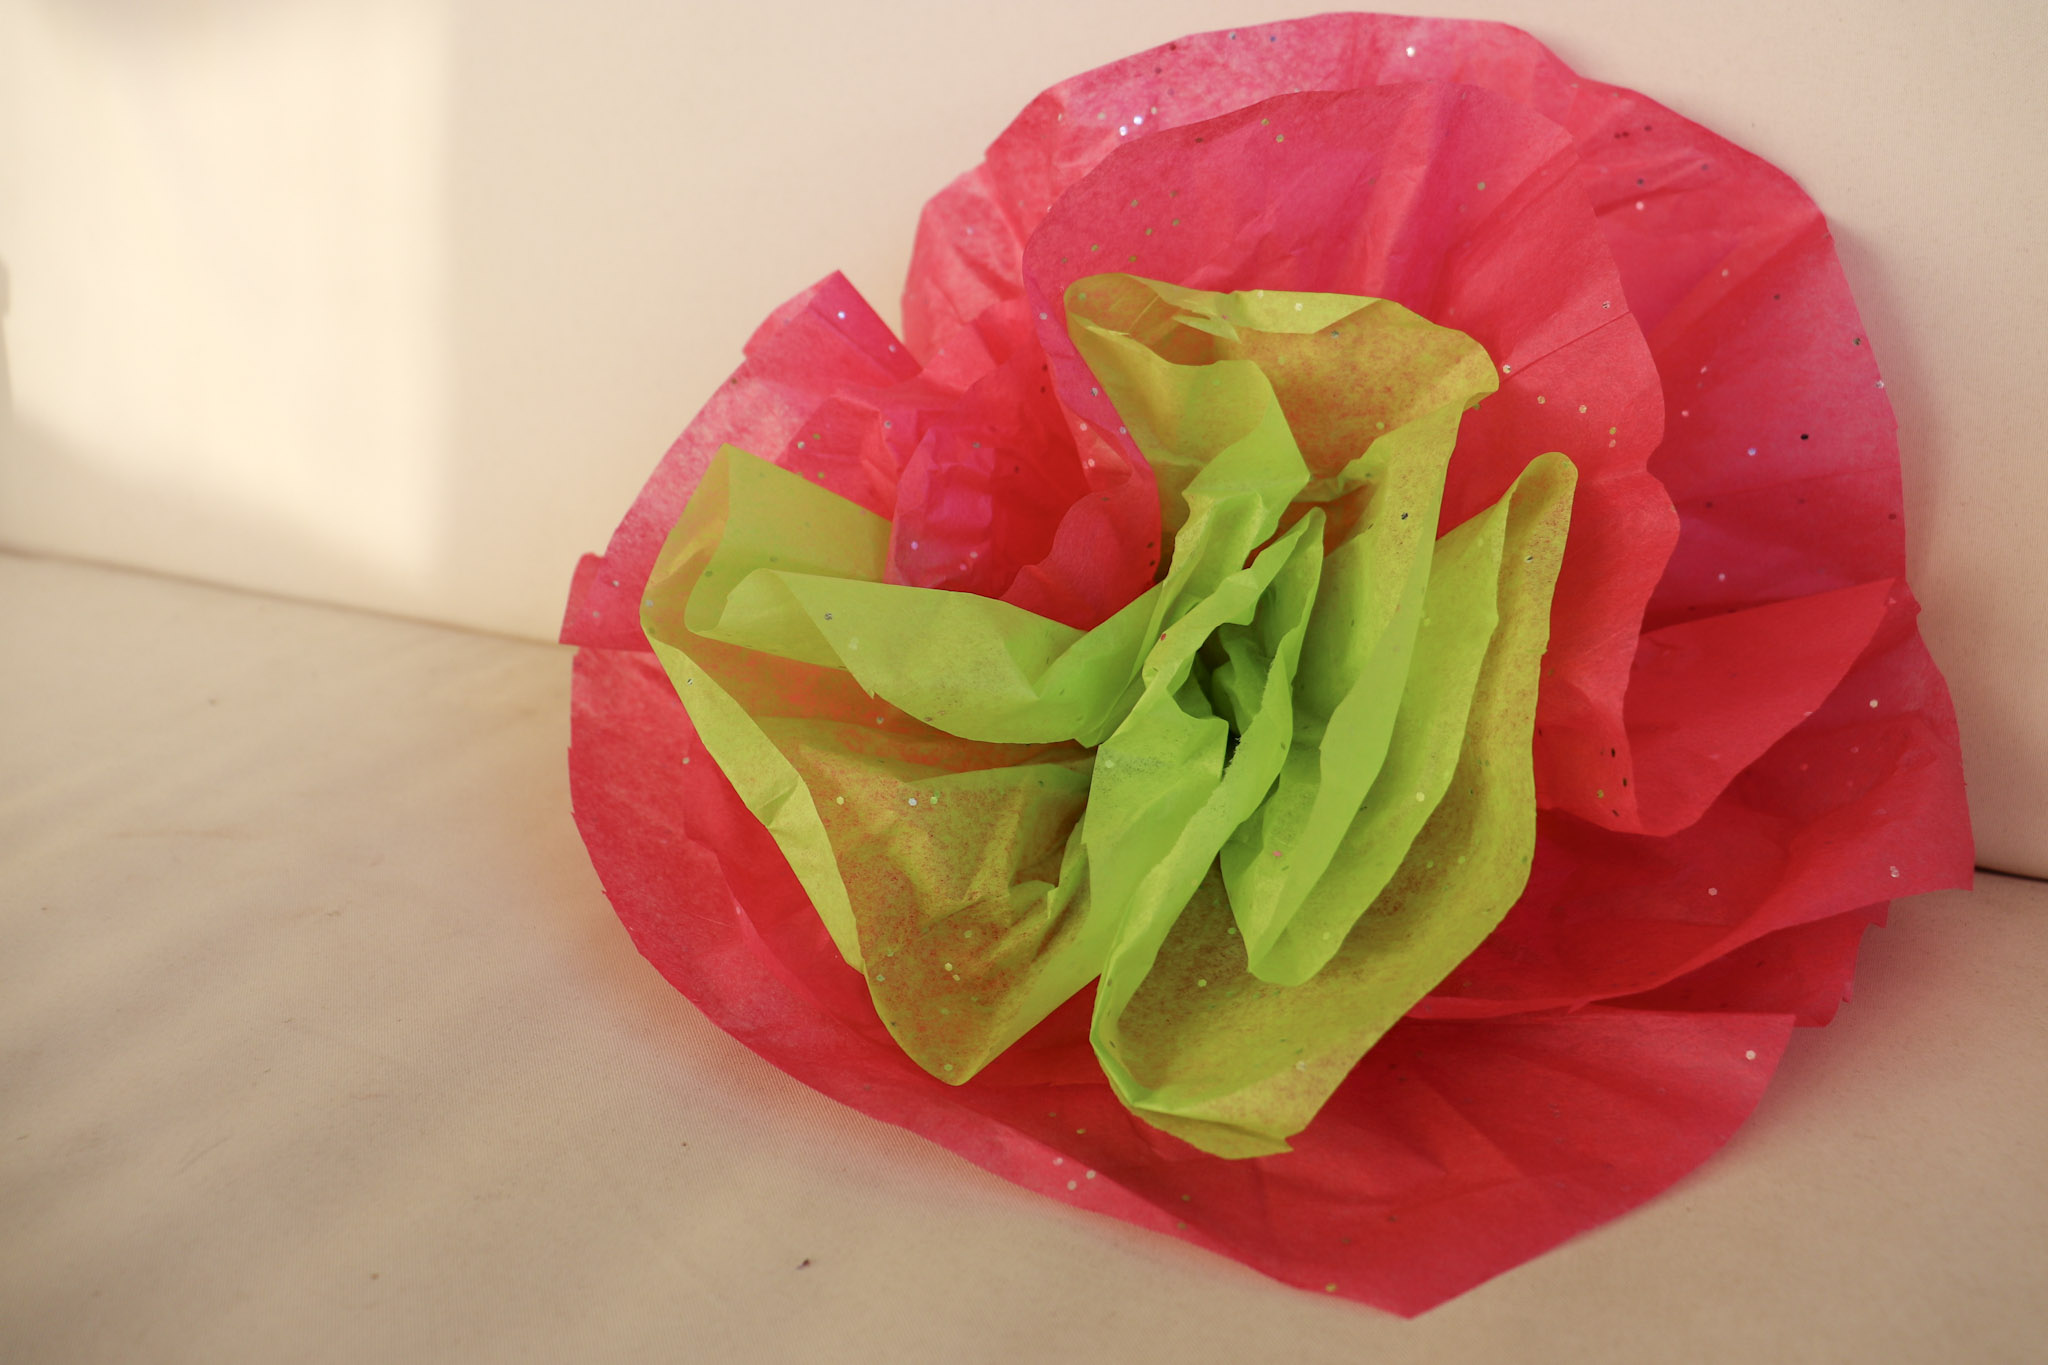 How to Make Flowers Out of Tissue Paper, Tissue Paper Craft, Tissue Paper Crafts, Giant Flowers out of Tissue Paper, Charlotte Artist, Birthday Party Craft Ideas